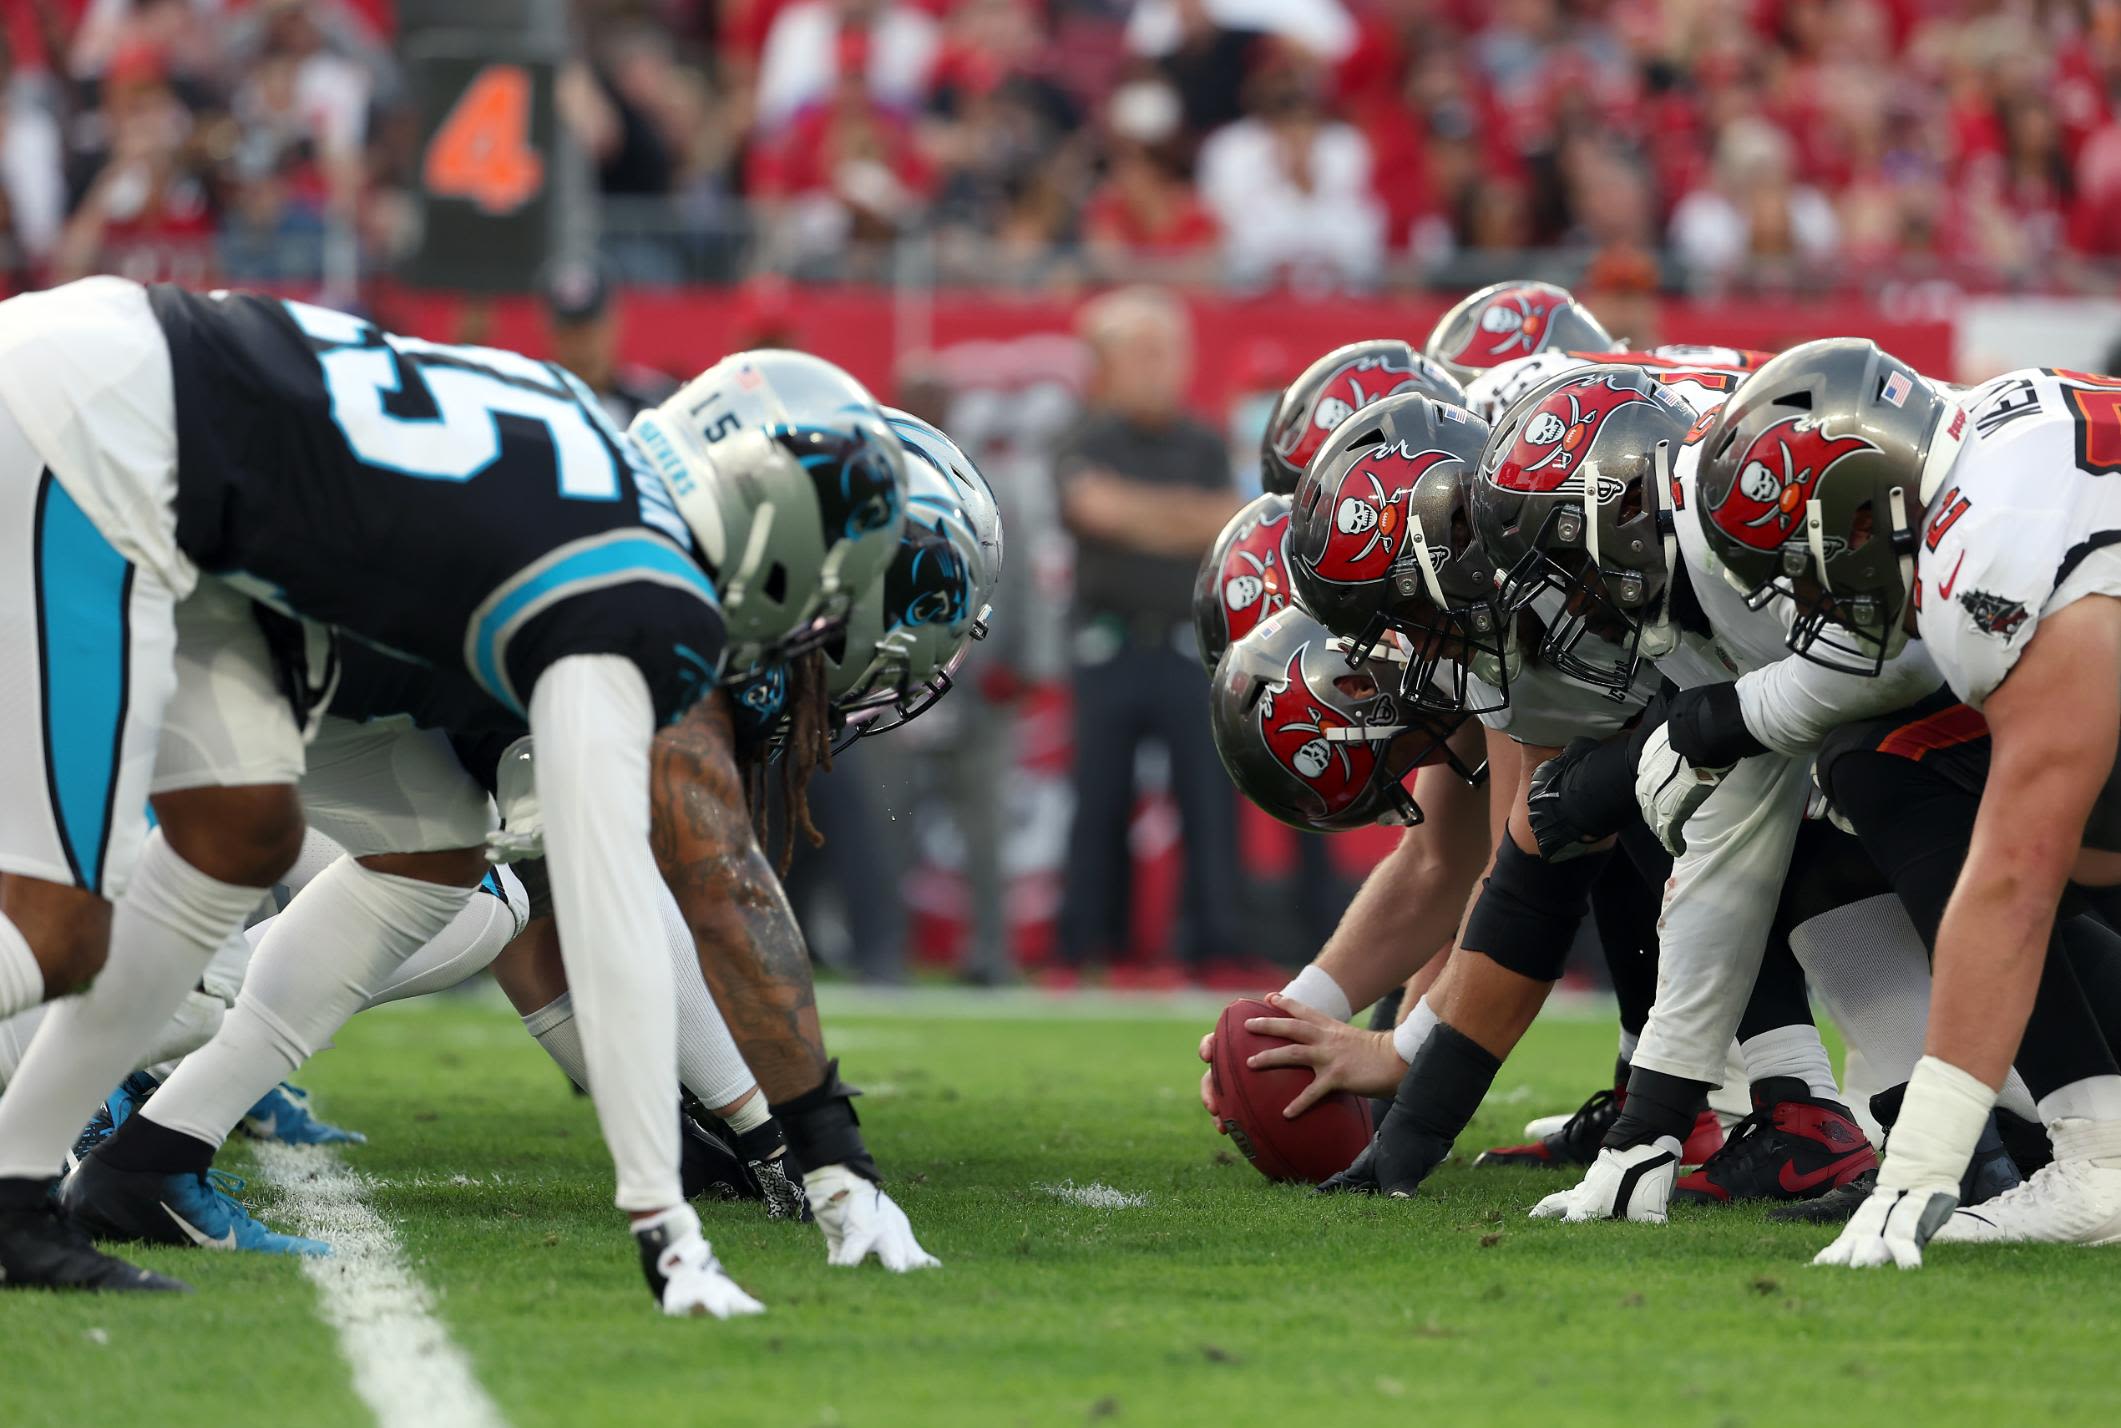 Tackling Tech: NFL and Perform Team to Take Games Global